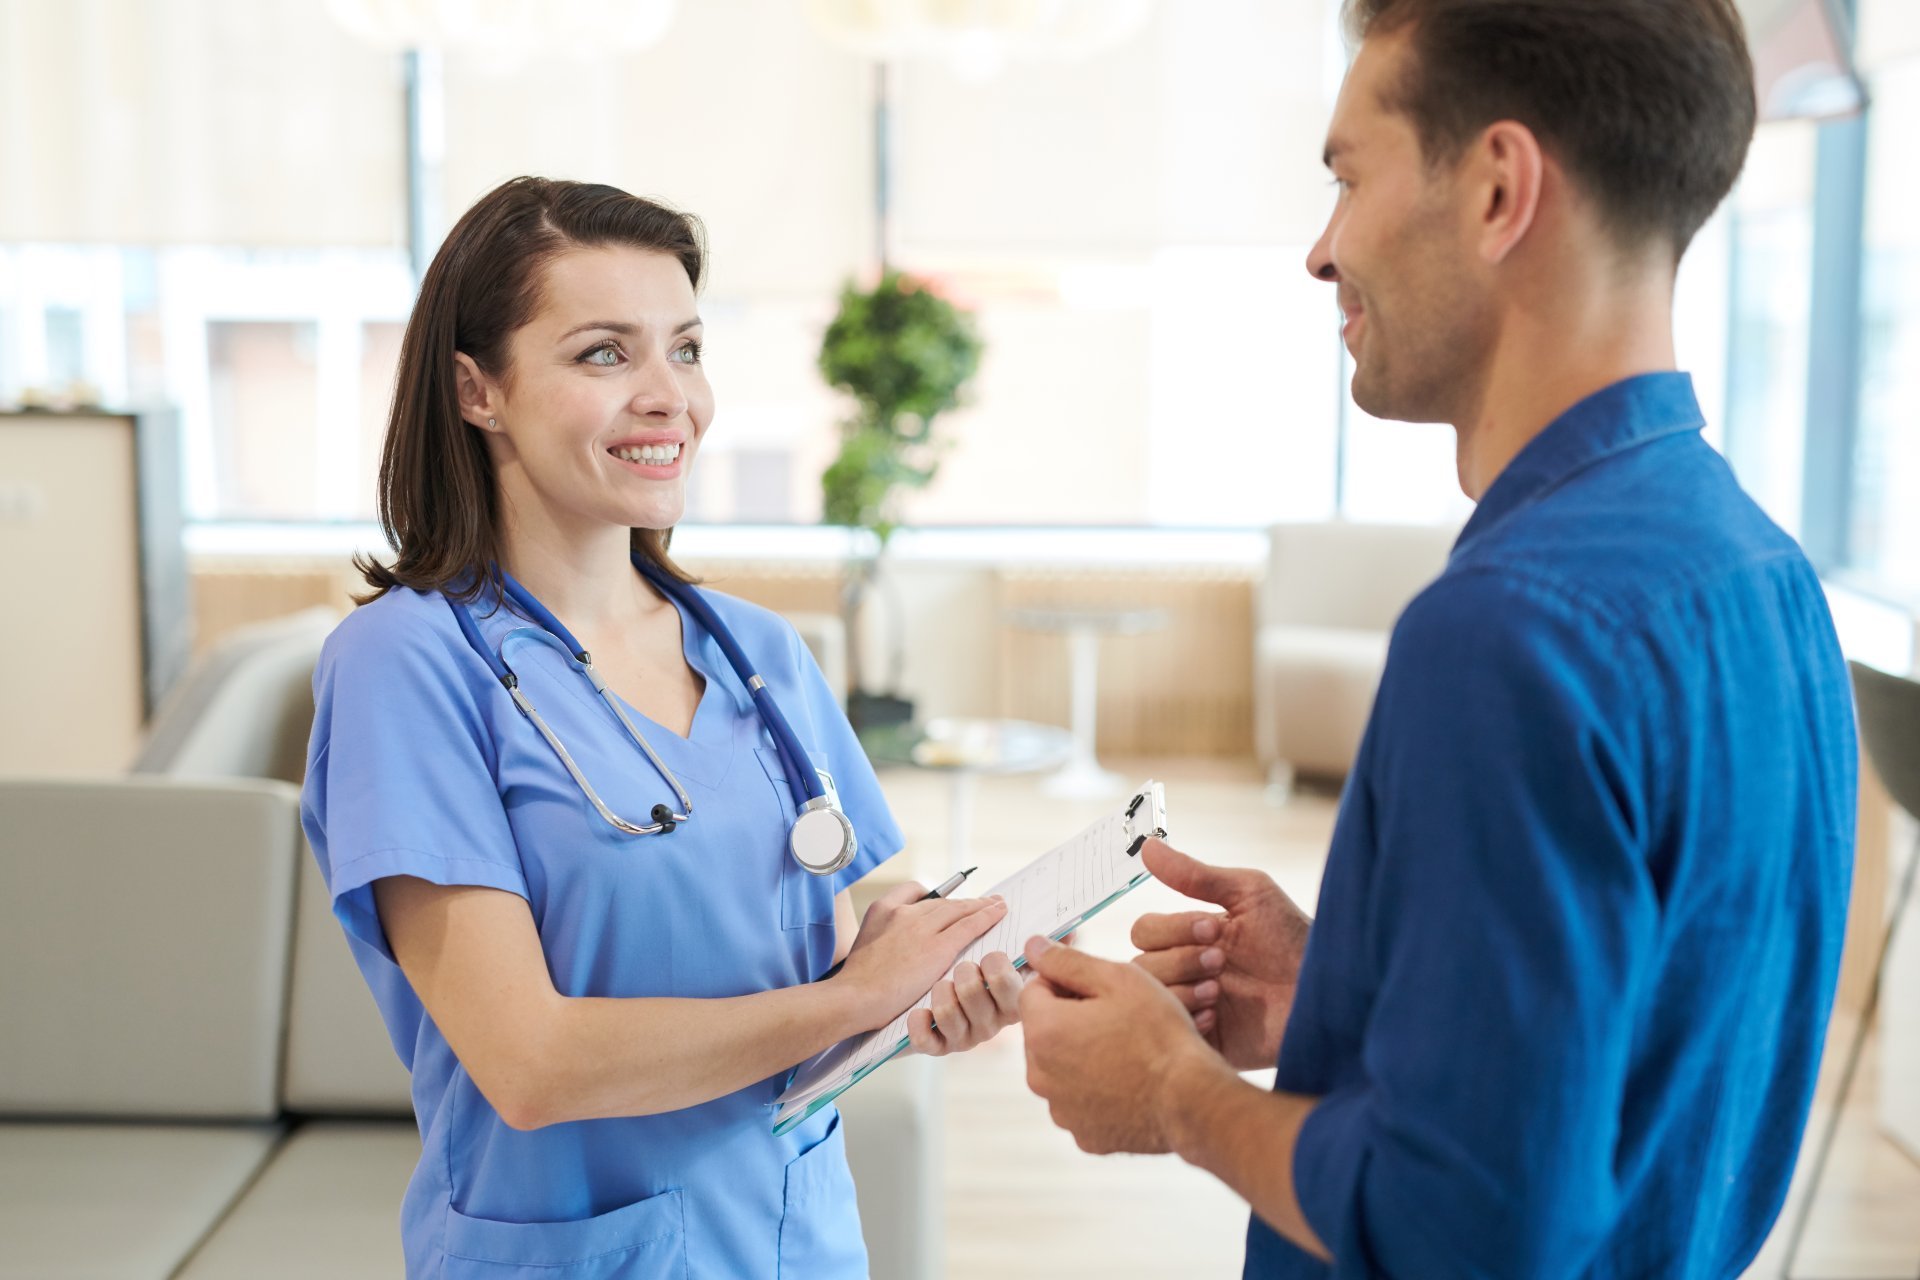 Nurses must use their interpersonal skills every single day when interacting with patients.